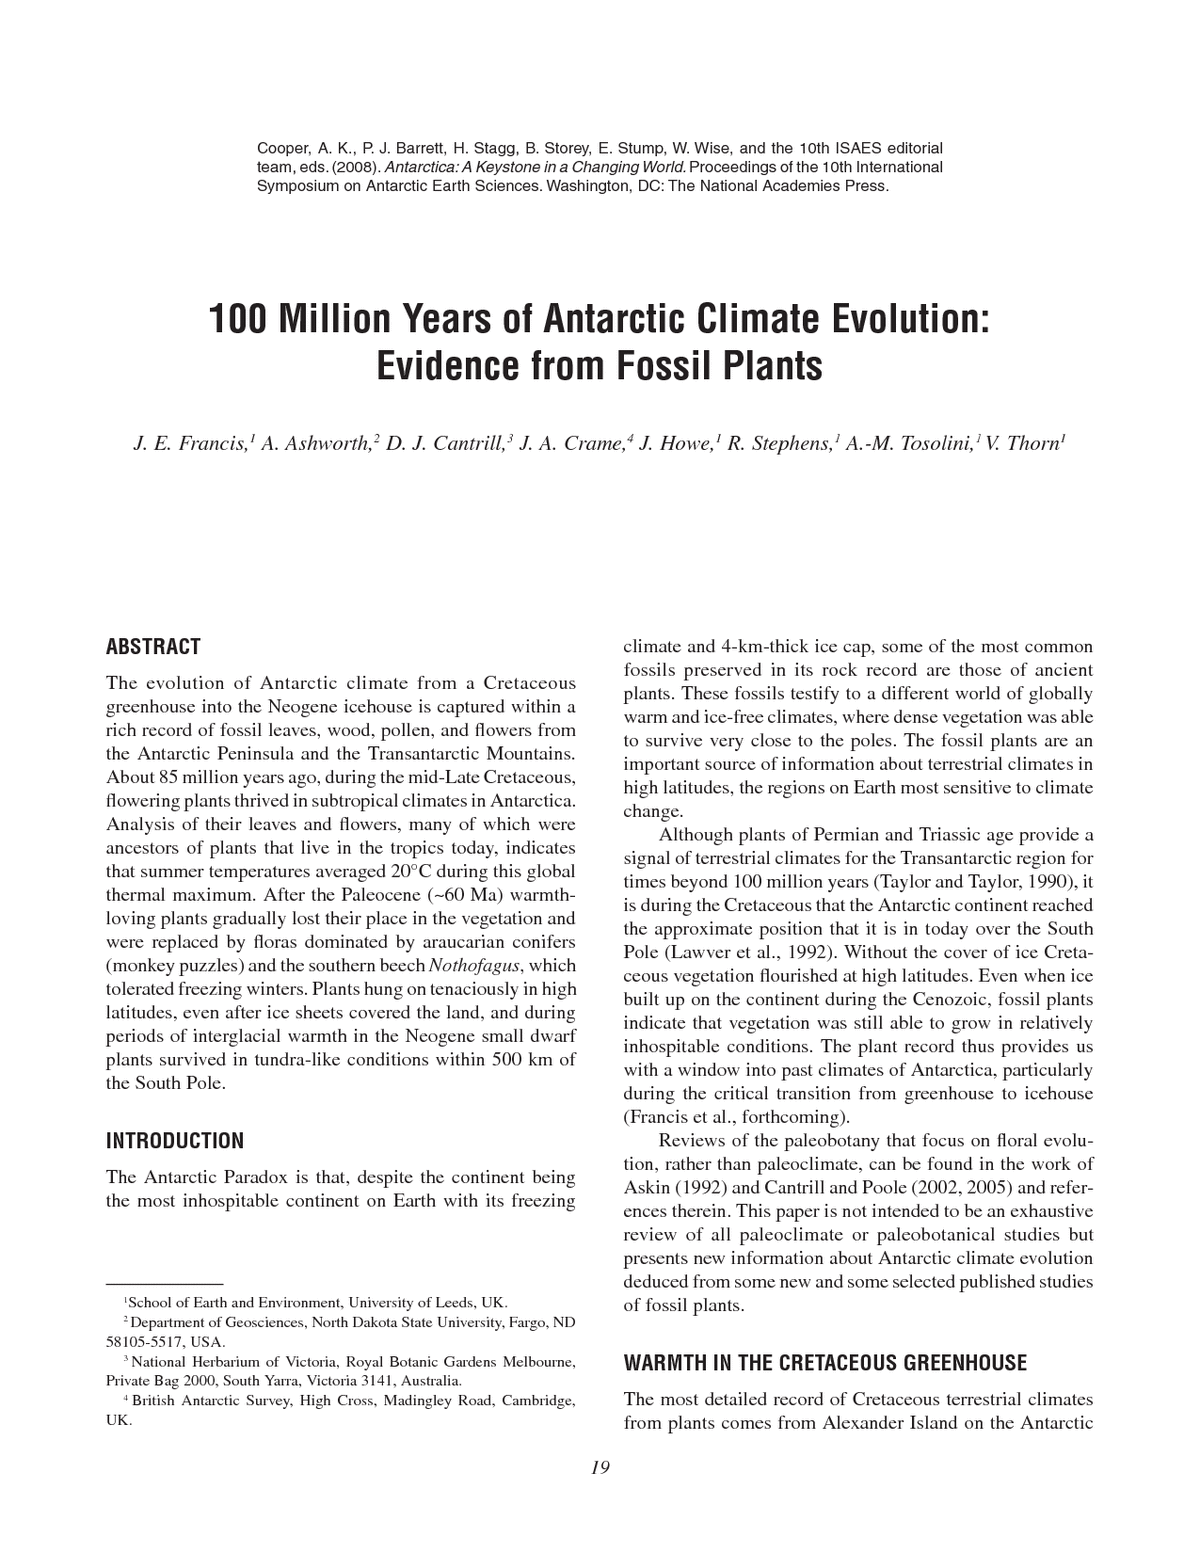 100 Million Years Of Antarctic Climate Evolution Evidence From Fossil Plants J E Francis A Ashworth D J Cantrill J A Crame J Howe R Stephens A M Tosolini And V Thorn Antarctica